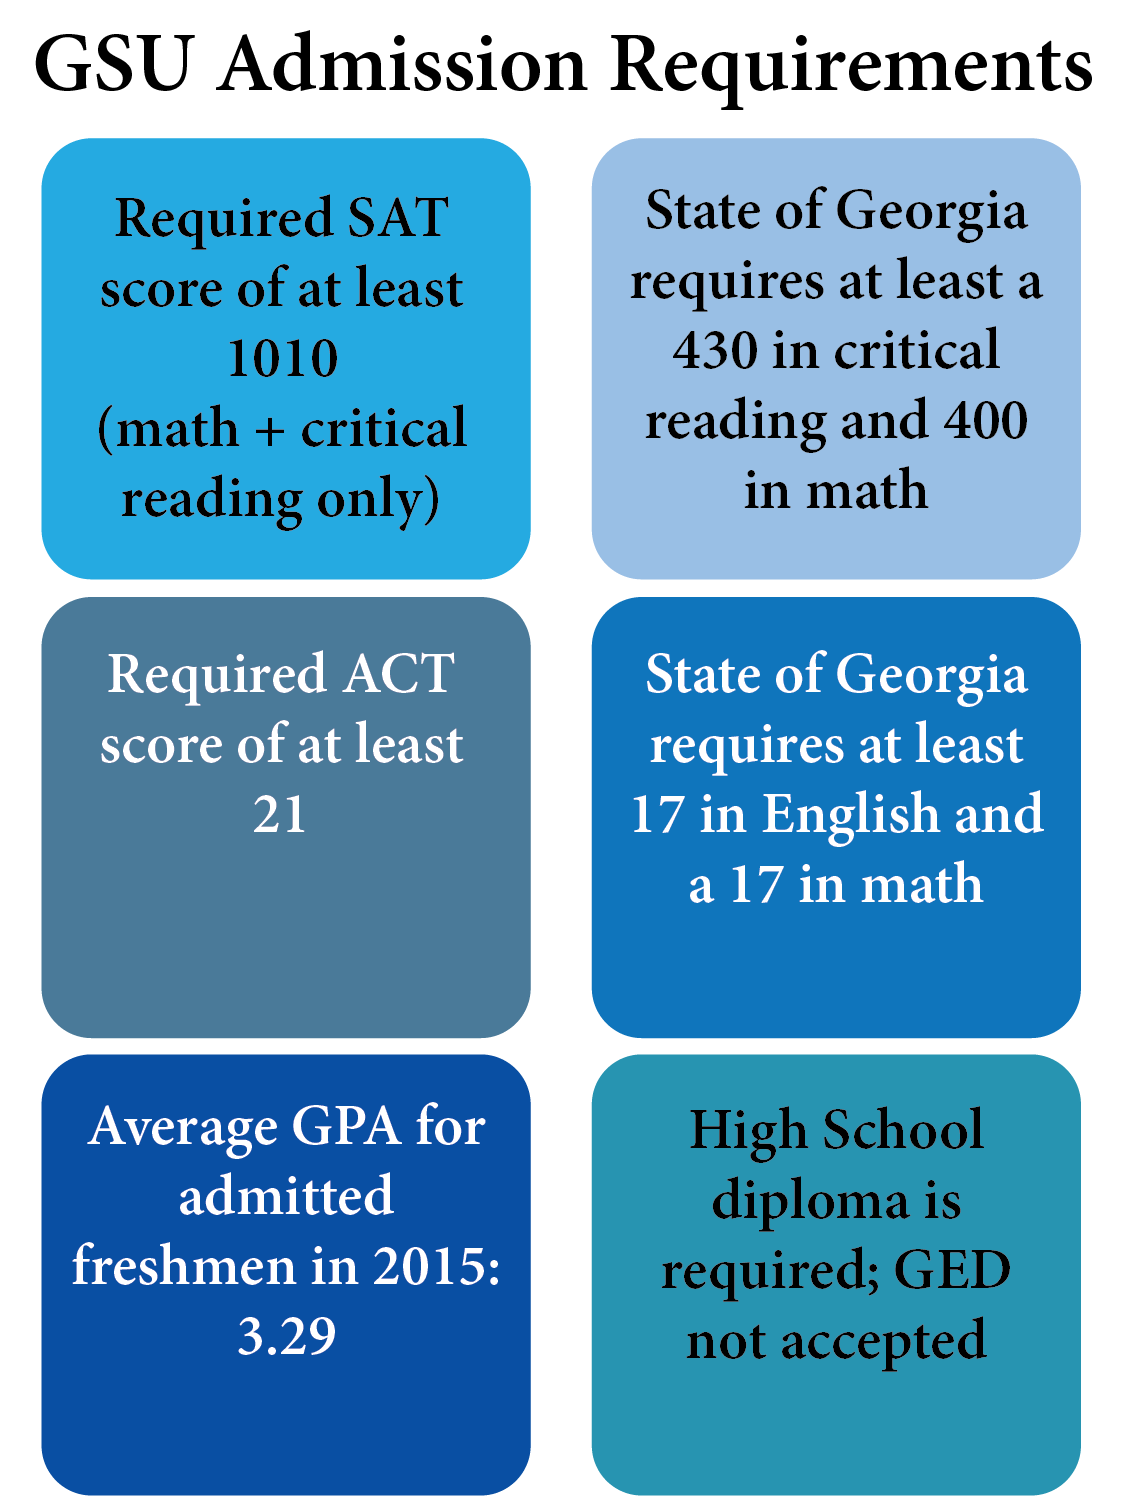 GSU+enrollment+stagnates+over+past+five+years